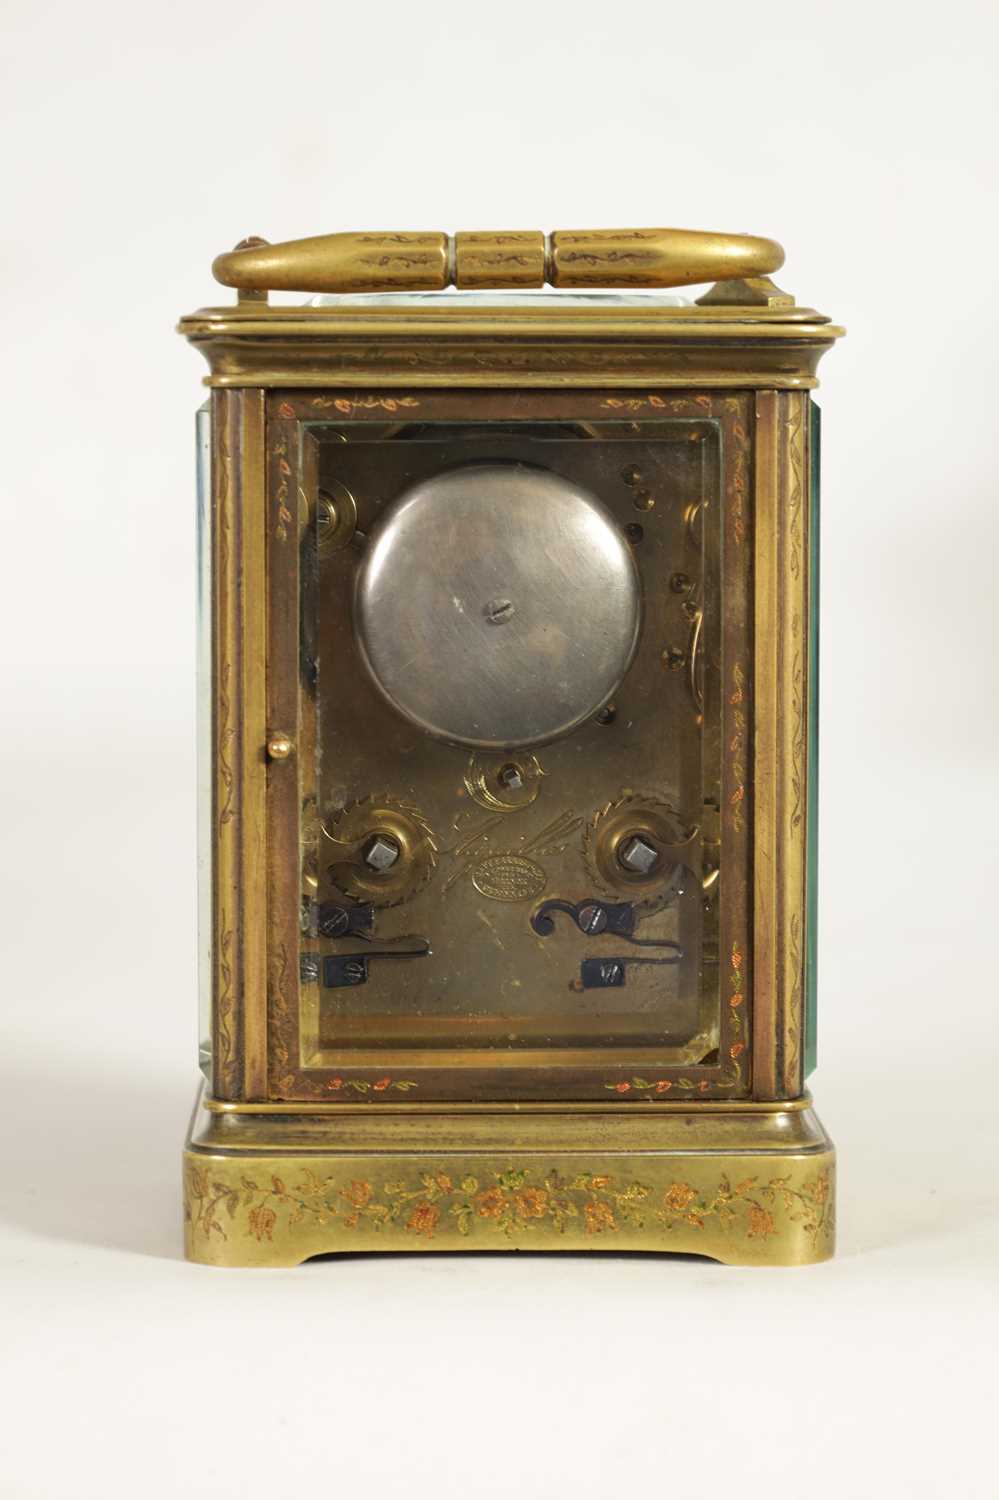 JAPY FRERES. A LATE 19TH CENTURY FRENCH ENGRAVED STRIKING CARRIAGE CLOCK - Image 10 of 13